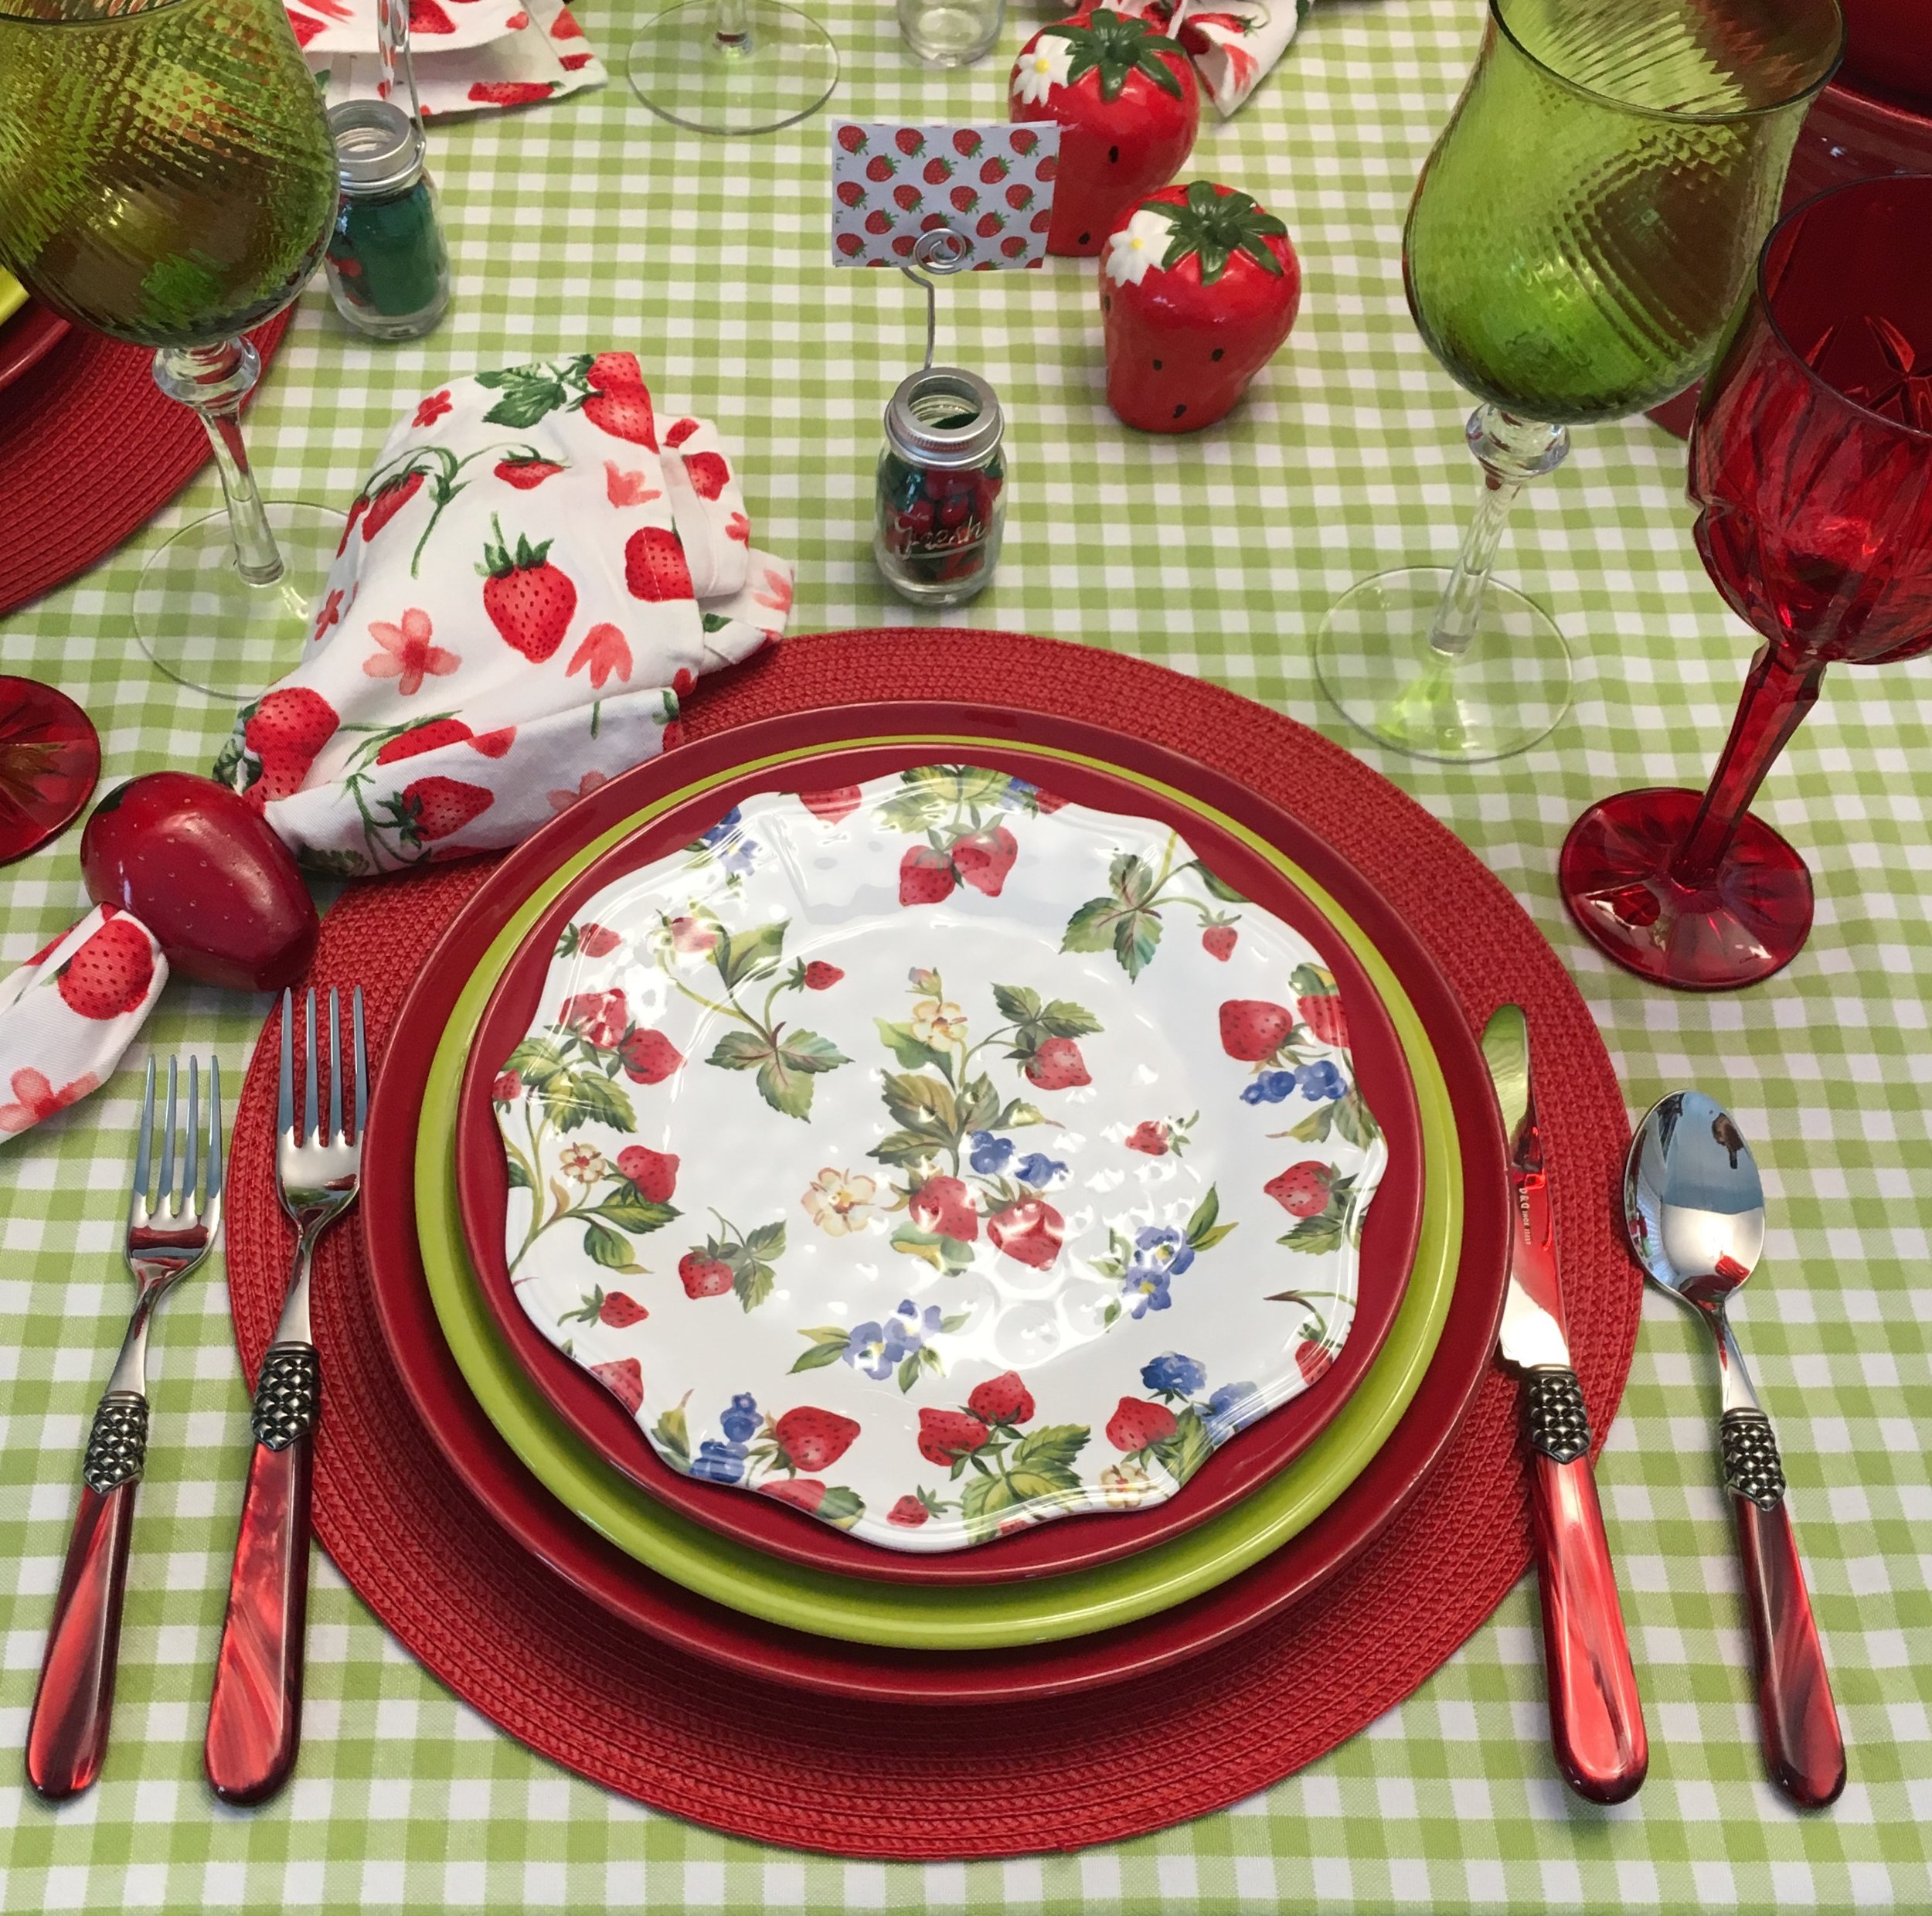 Strawberry Tablescape - A Wonderful Thought